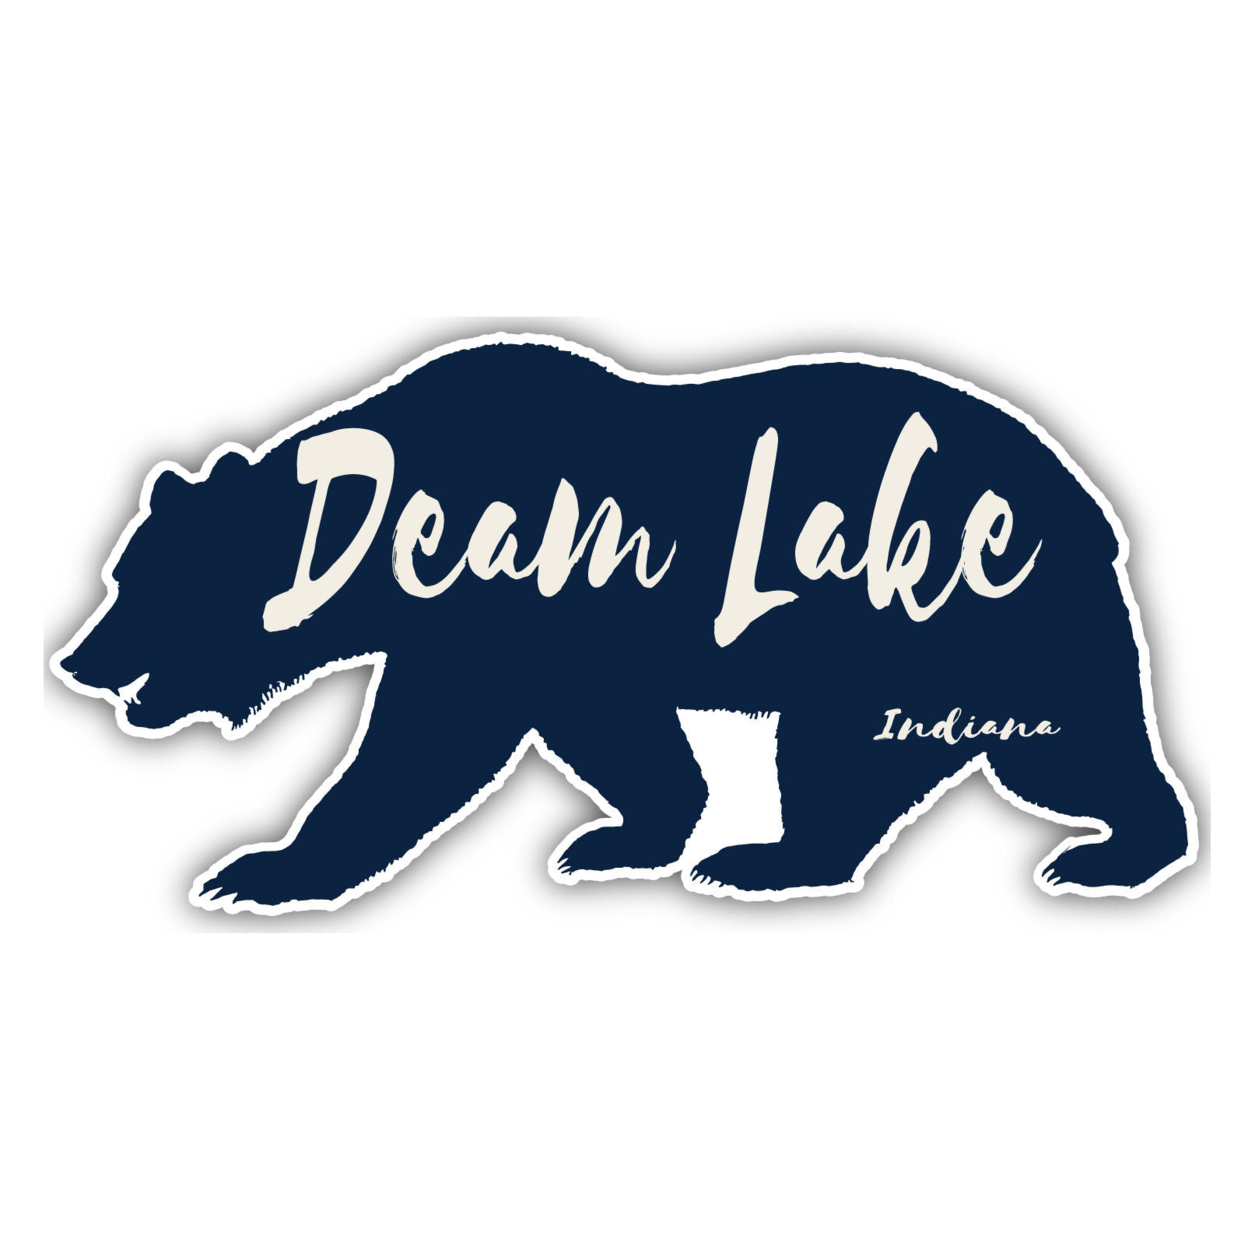 Deam Lake Indiana Souvenir Decorative Stickers (Choose Theme And Size) - 4-Pack, 12-Inch, Great Outdoors